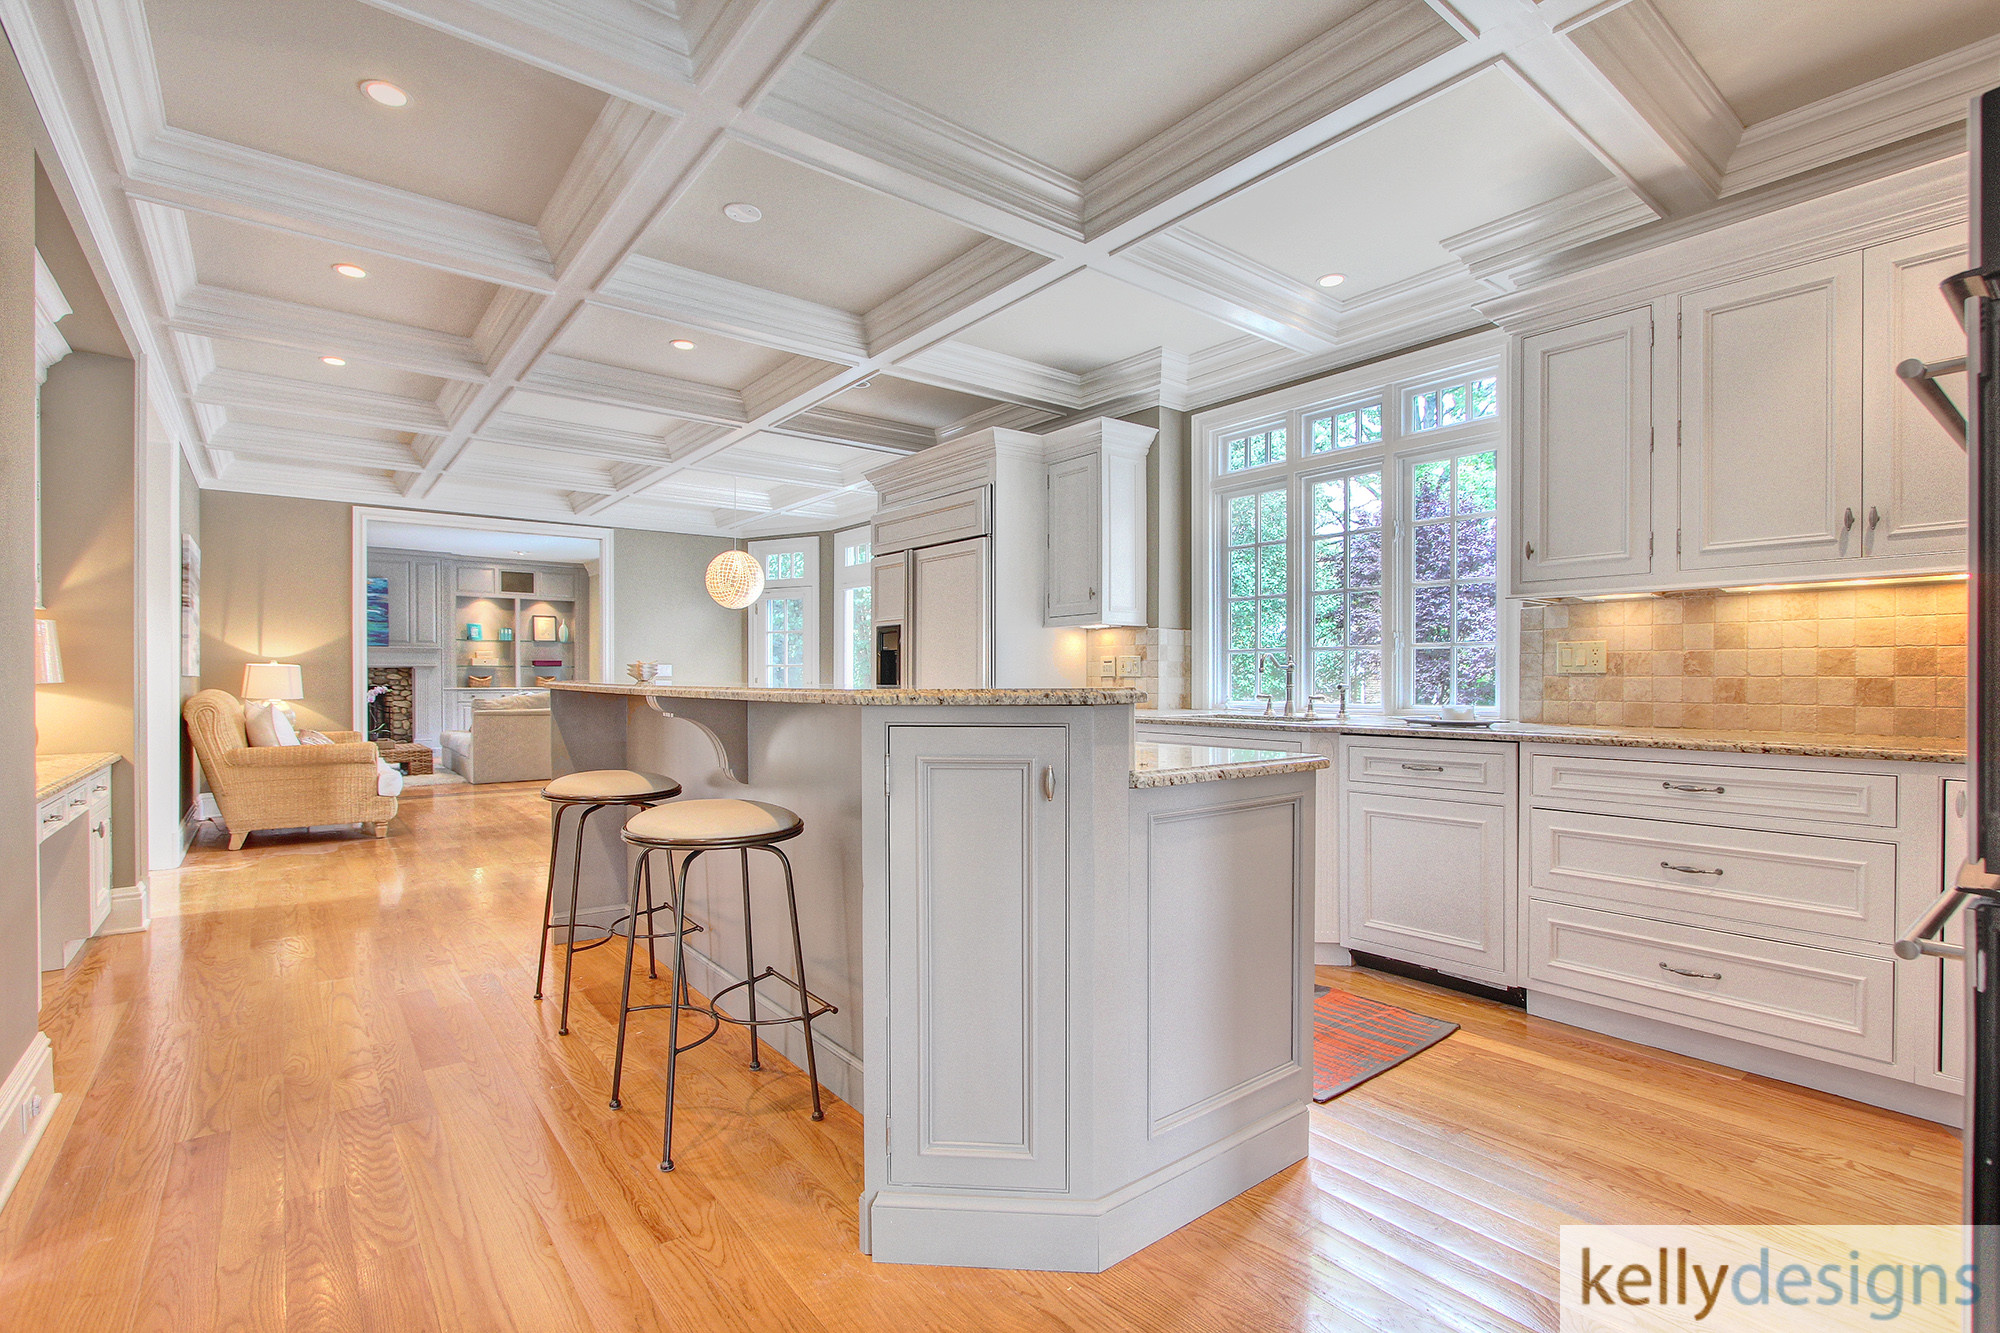 Staging Lalley   Kitchen   Home Staging By Kellydesigns